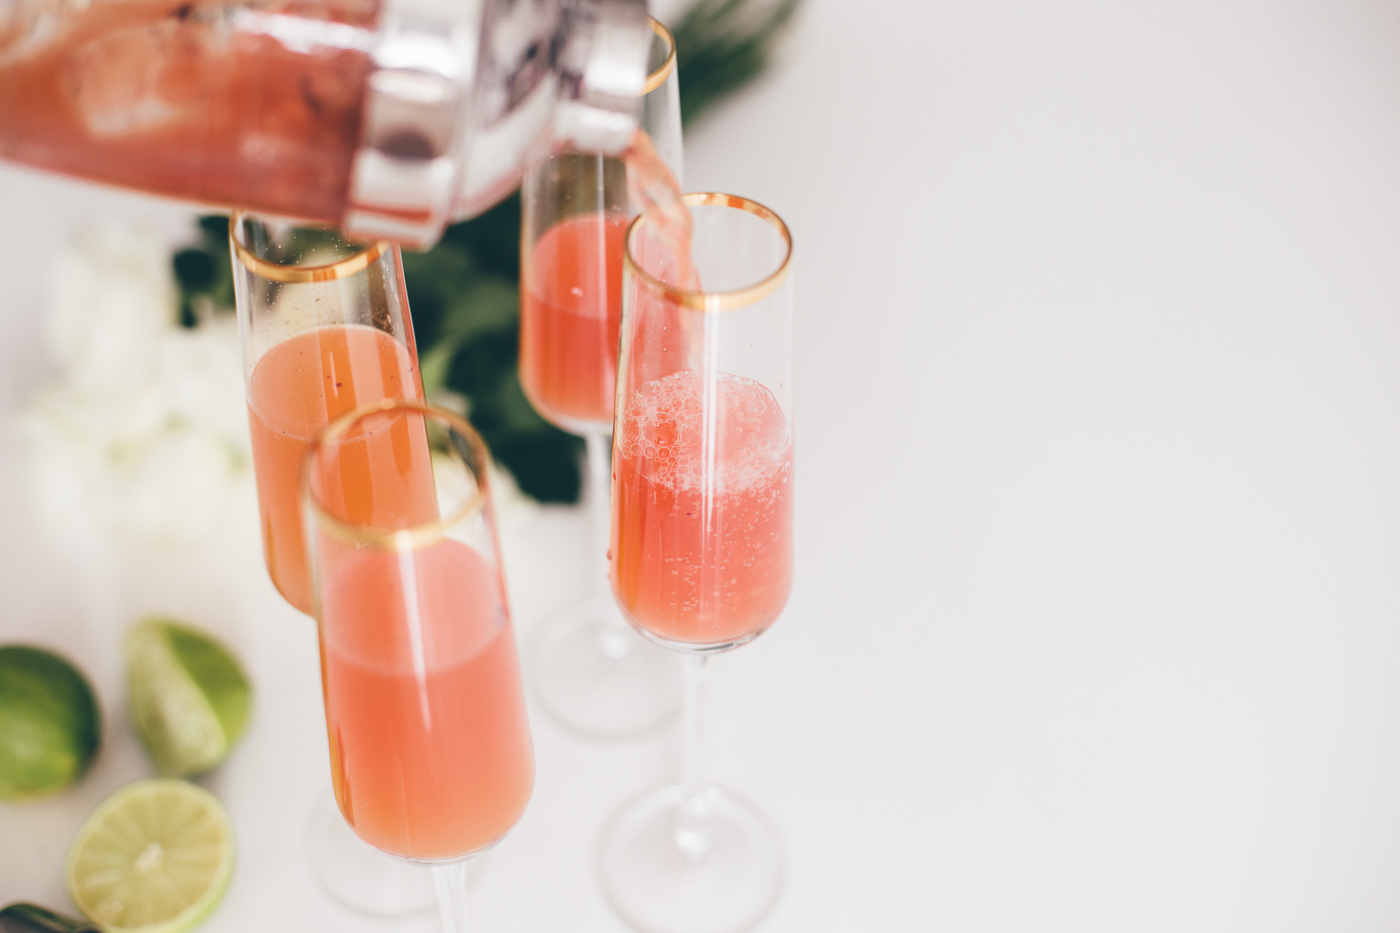 Blushing Bride Cocktail - Wedding Signature Cocktails | Love Daily Dose